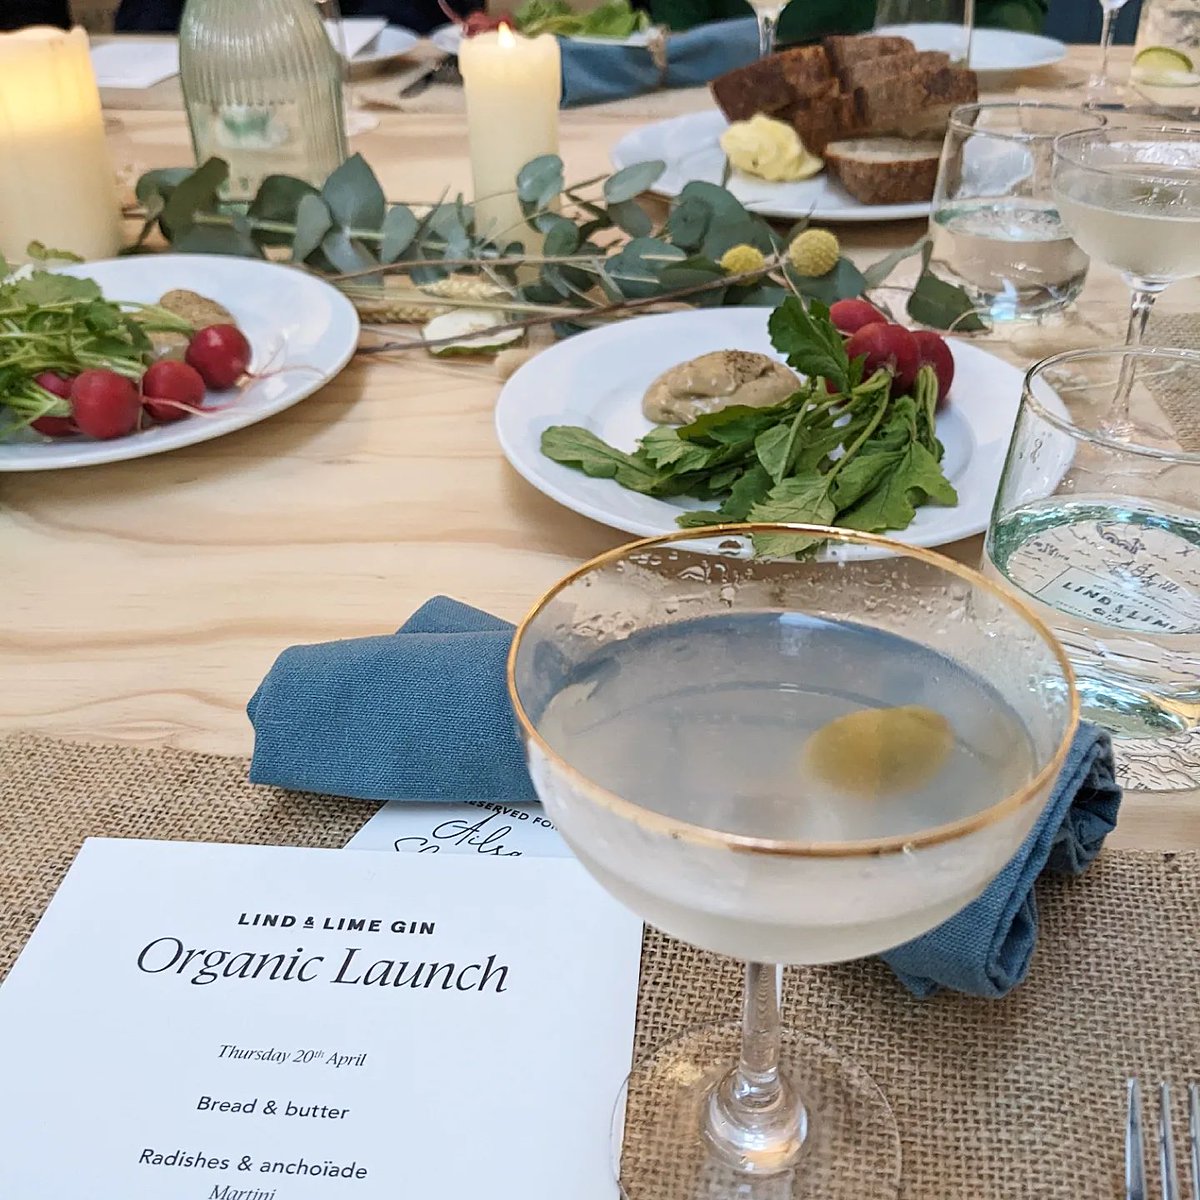 Last week we invited a mix of influencers, trade and media to a pop-up dinner hosted with The Palmerston to celebrate @LindandLime becoming certified organic. 📷 by @ailsajms1